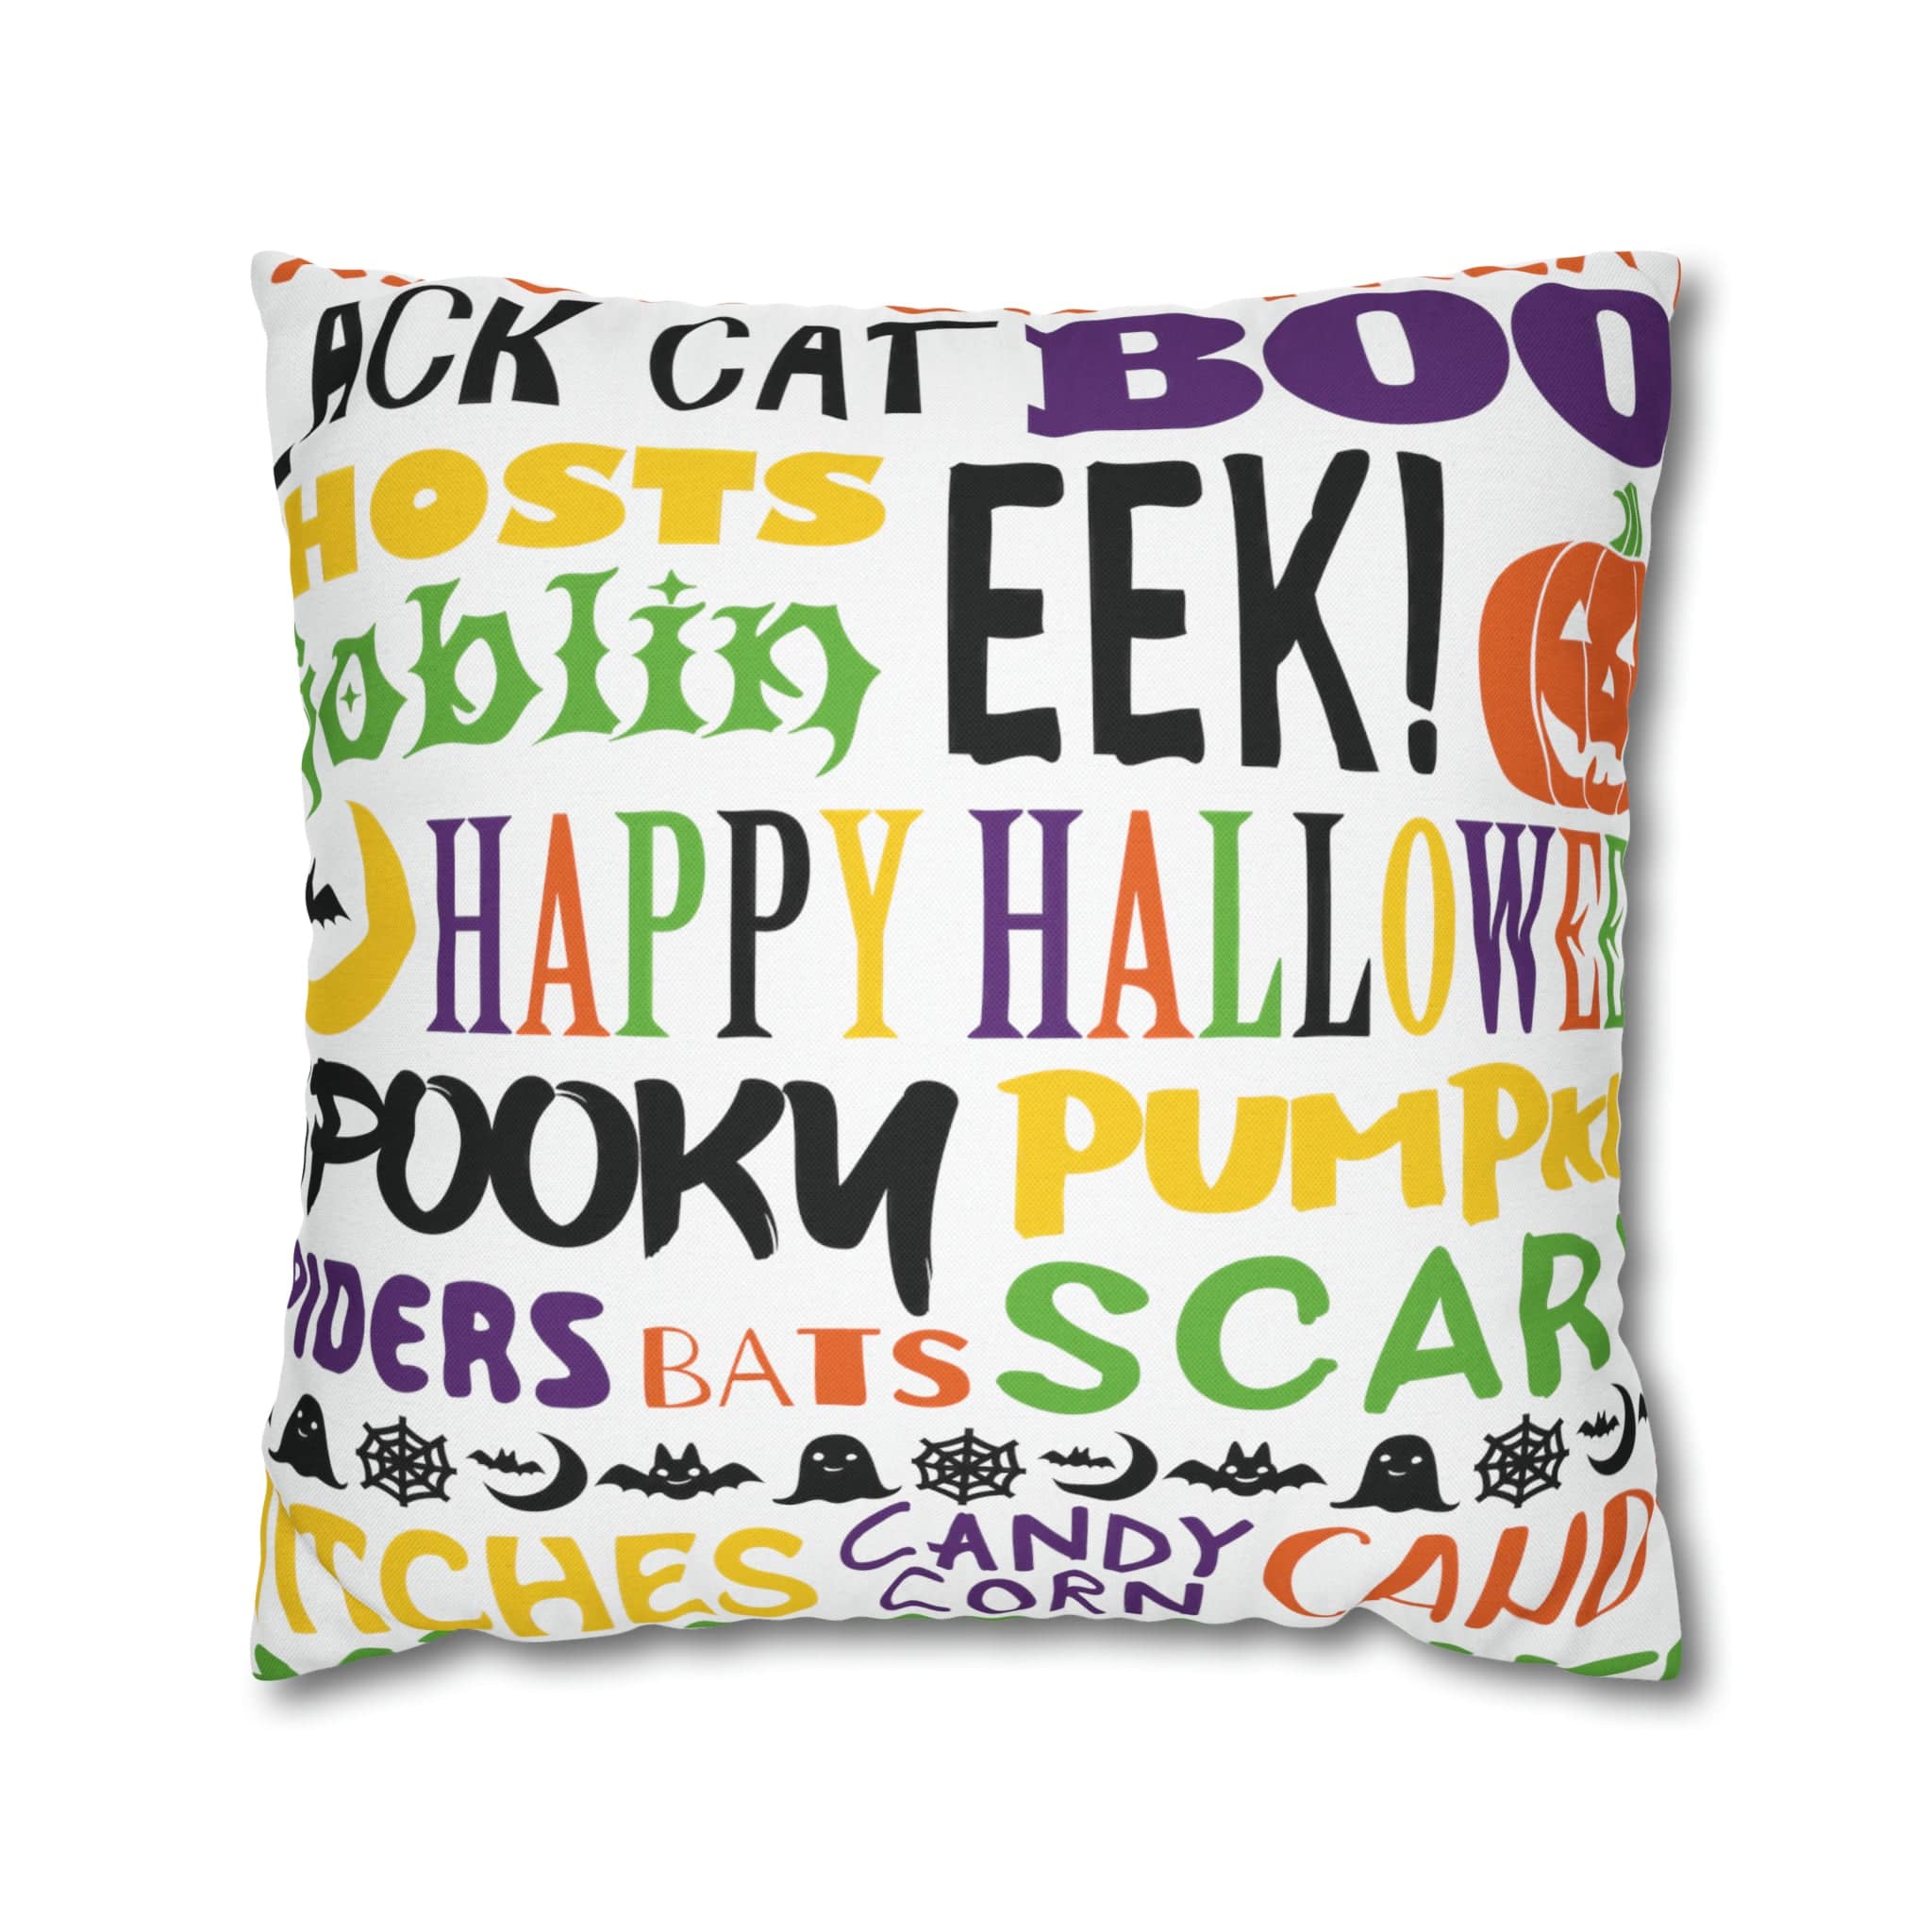 Kate McEnroe New York Halloween Throw Pillow Cover, Trick or Treat, Spooky Witches Haunted House Accent Pillow, Country Farmhouse Home Decor GiftThrow Pillow Covers10563674571104697694